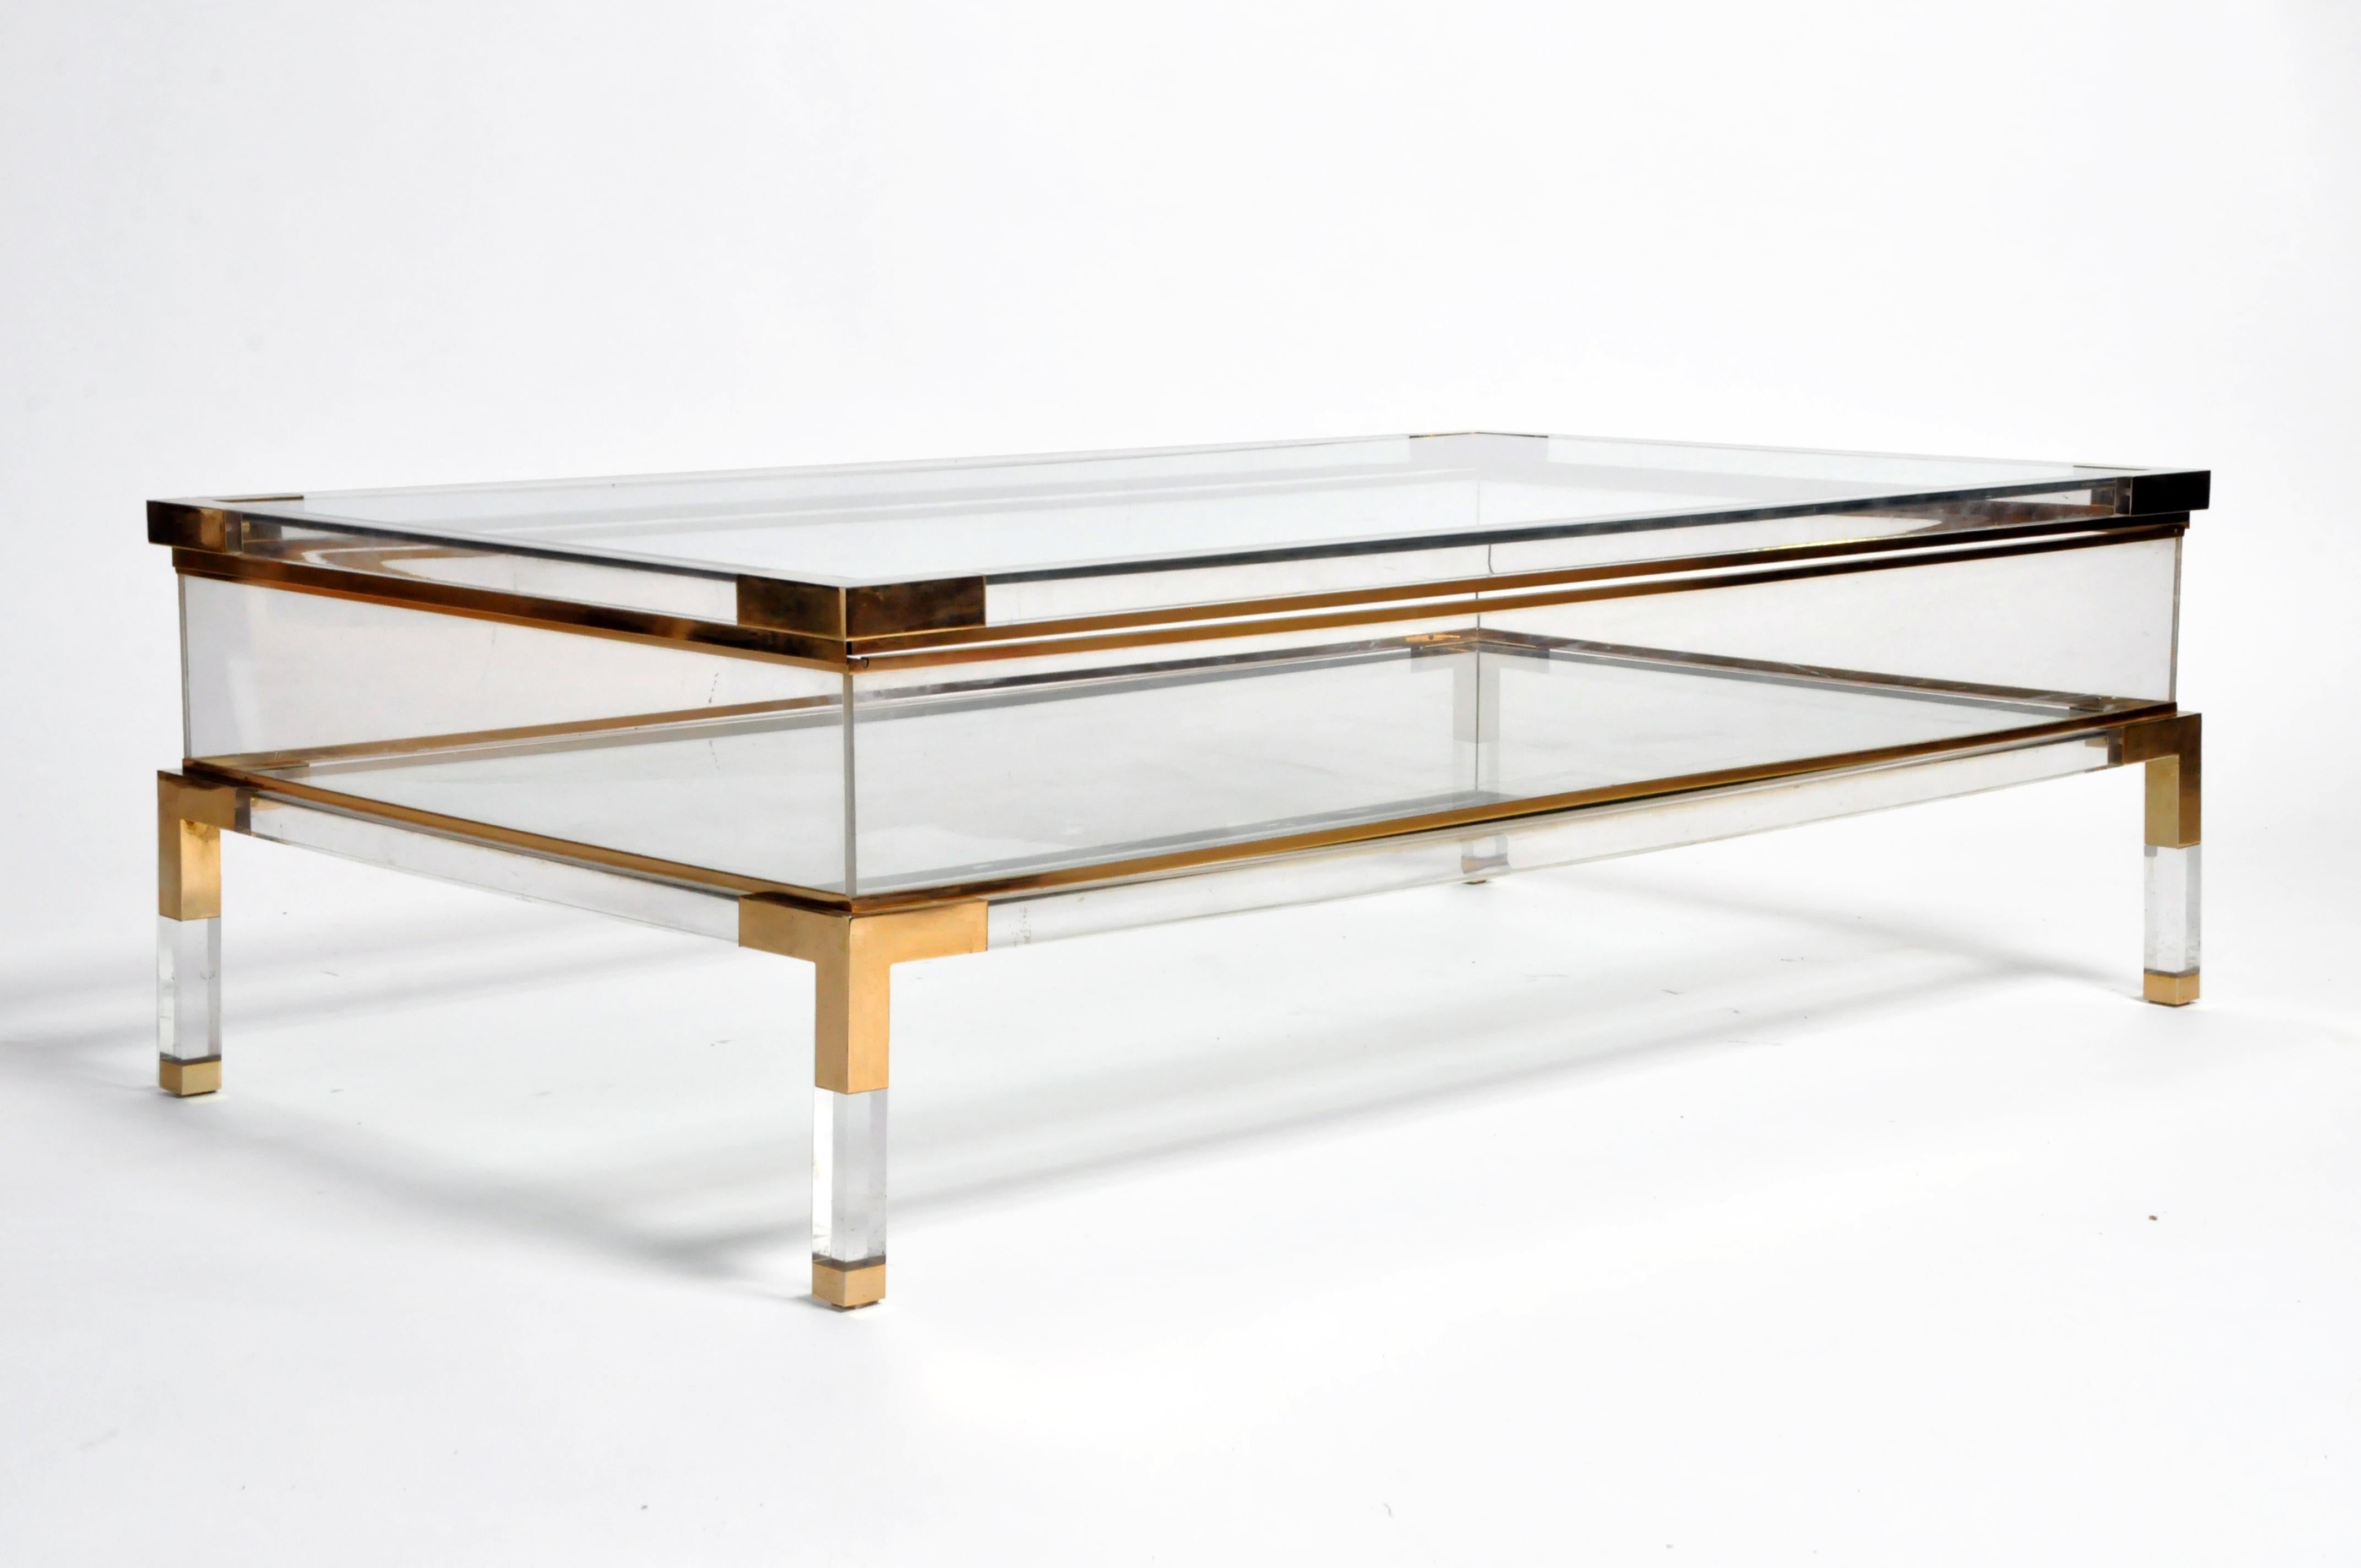 This sleek vitrine table has a glass top that slides opens to reveal a storage space below. Walled with Lucite, the clear glass bottom shelf allows the chrome frame to show through; the effect is airy and angular. This versatile display case is a